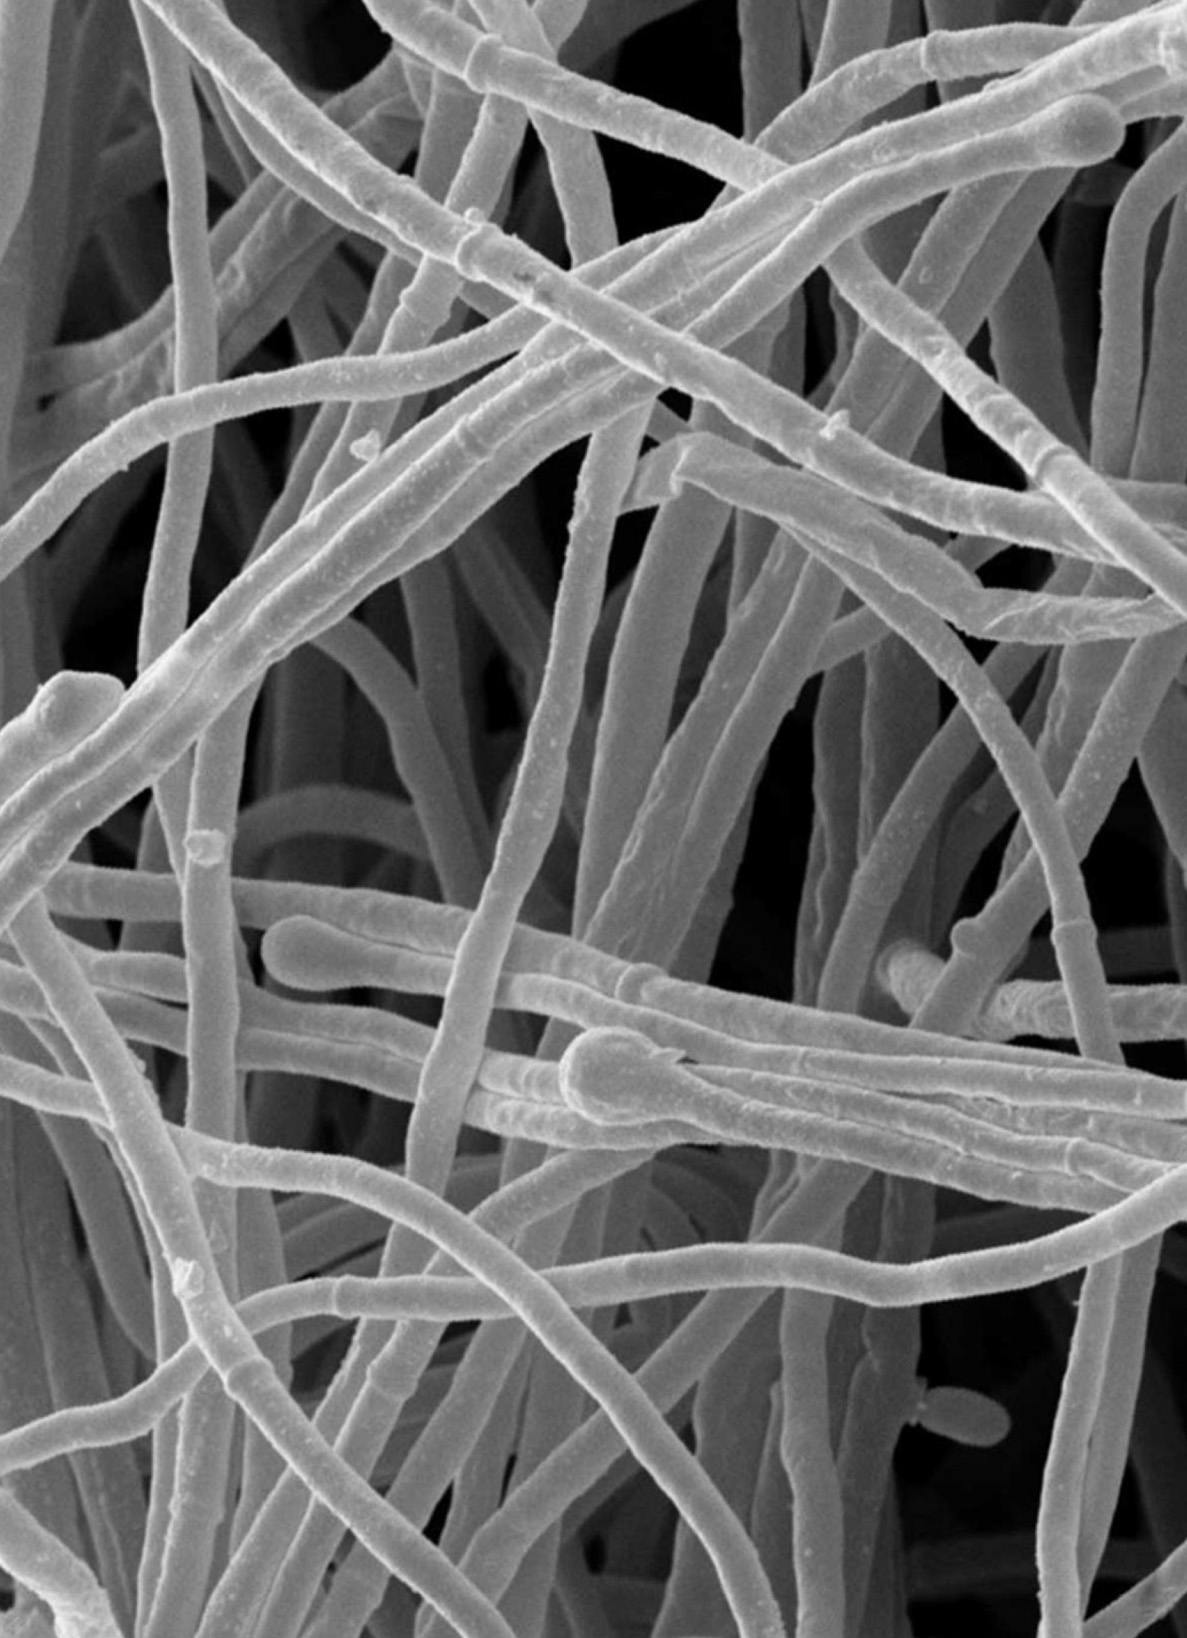 Hyphae is the root-like structure of mycelium